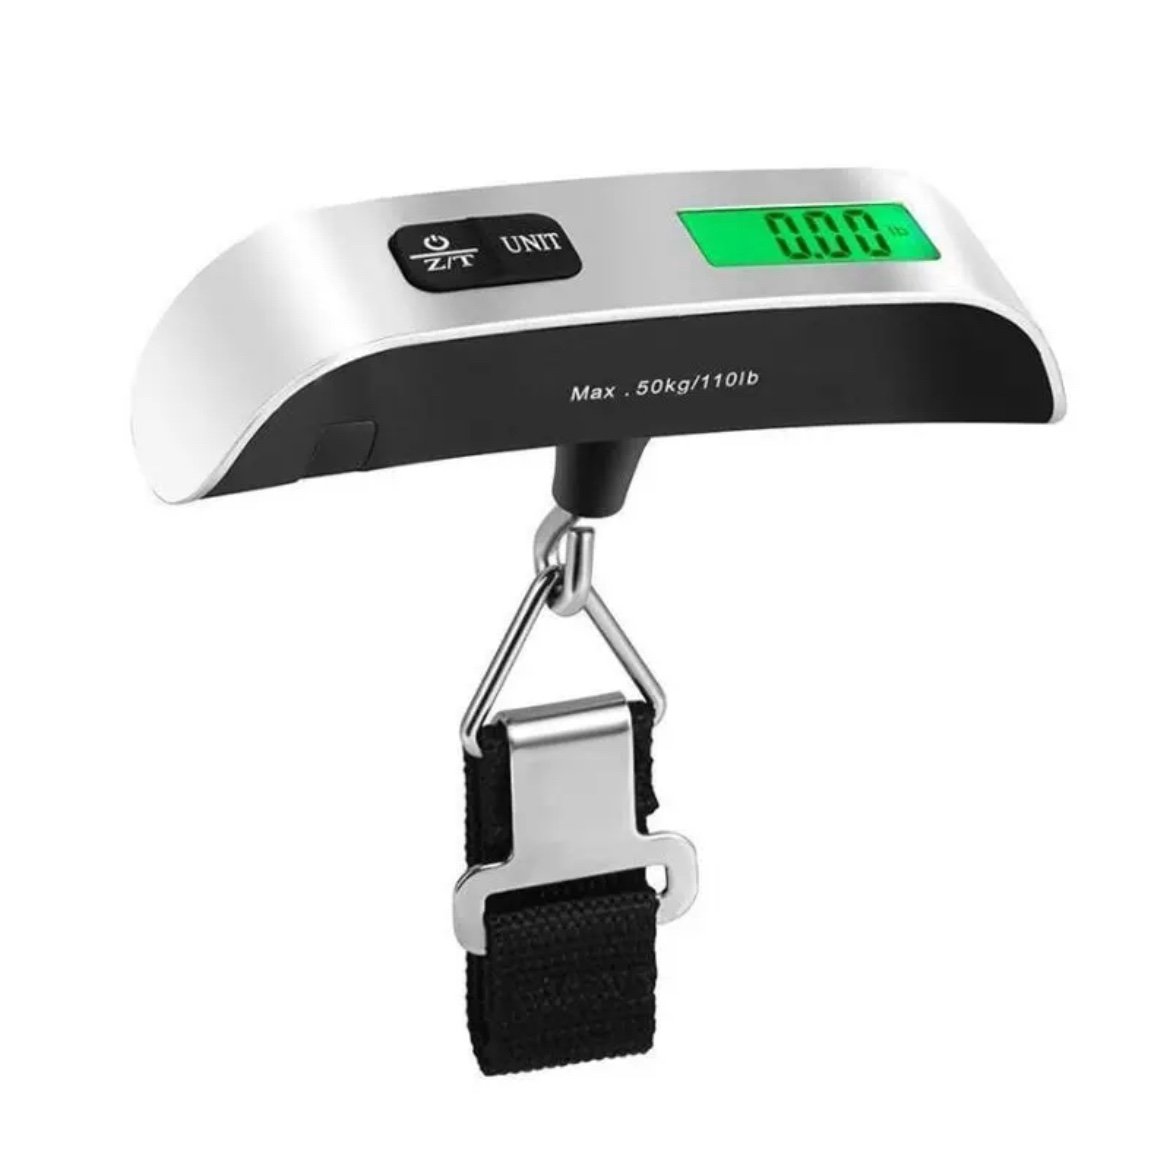 1pcs Portable Scale Digital LCD Display 110lb/50kg Electronic Luggage Scale dw1NDRJr8